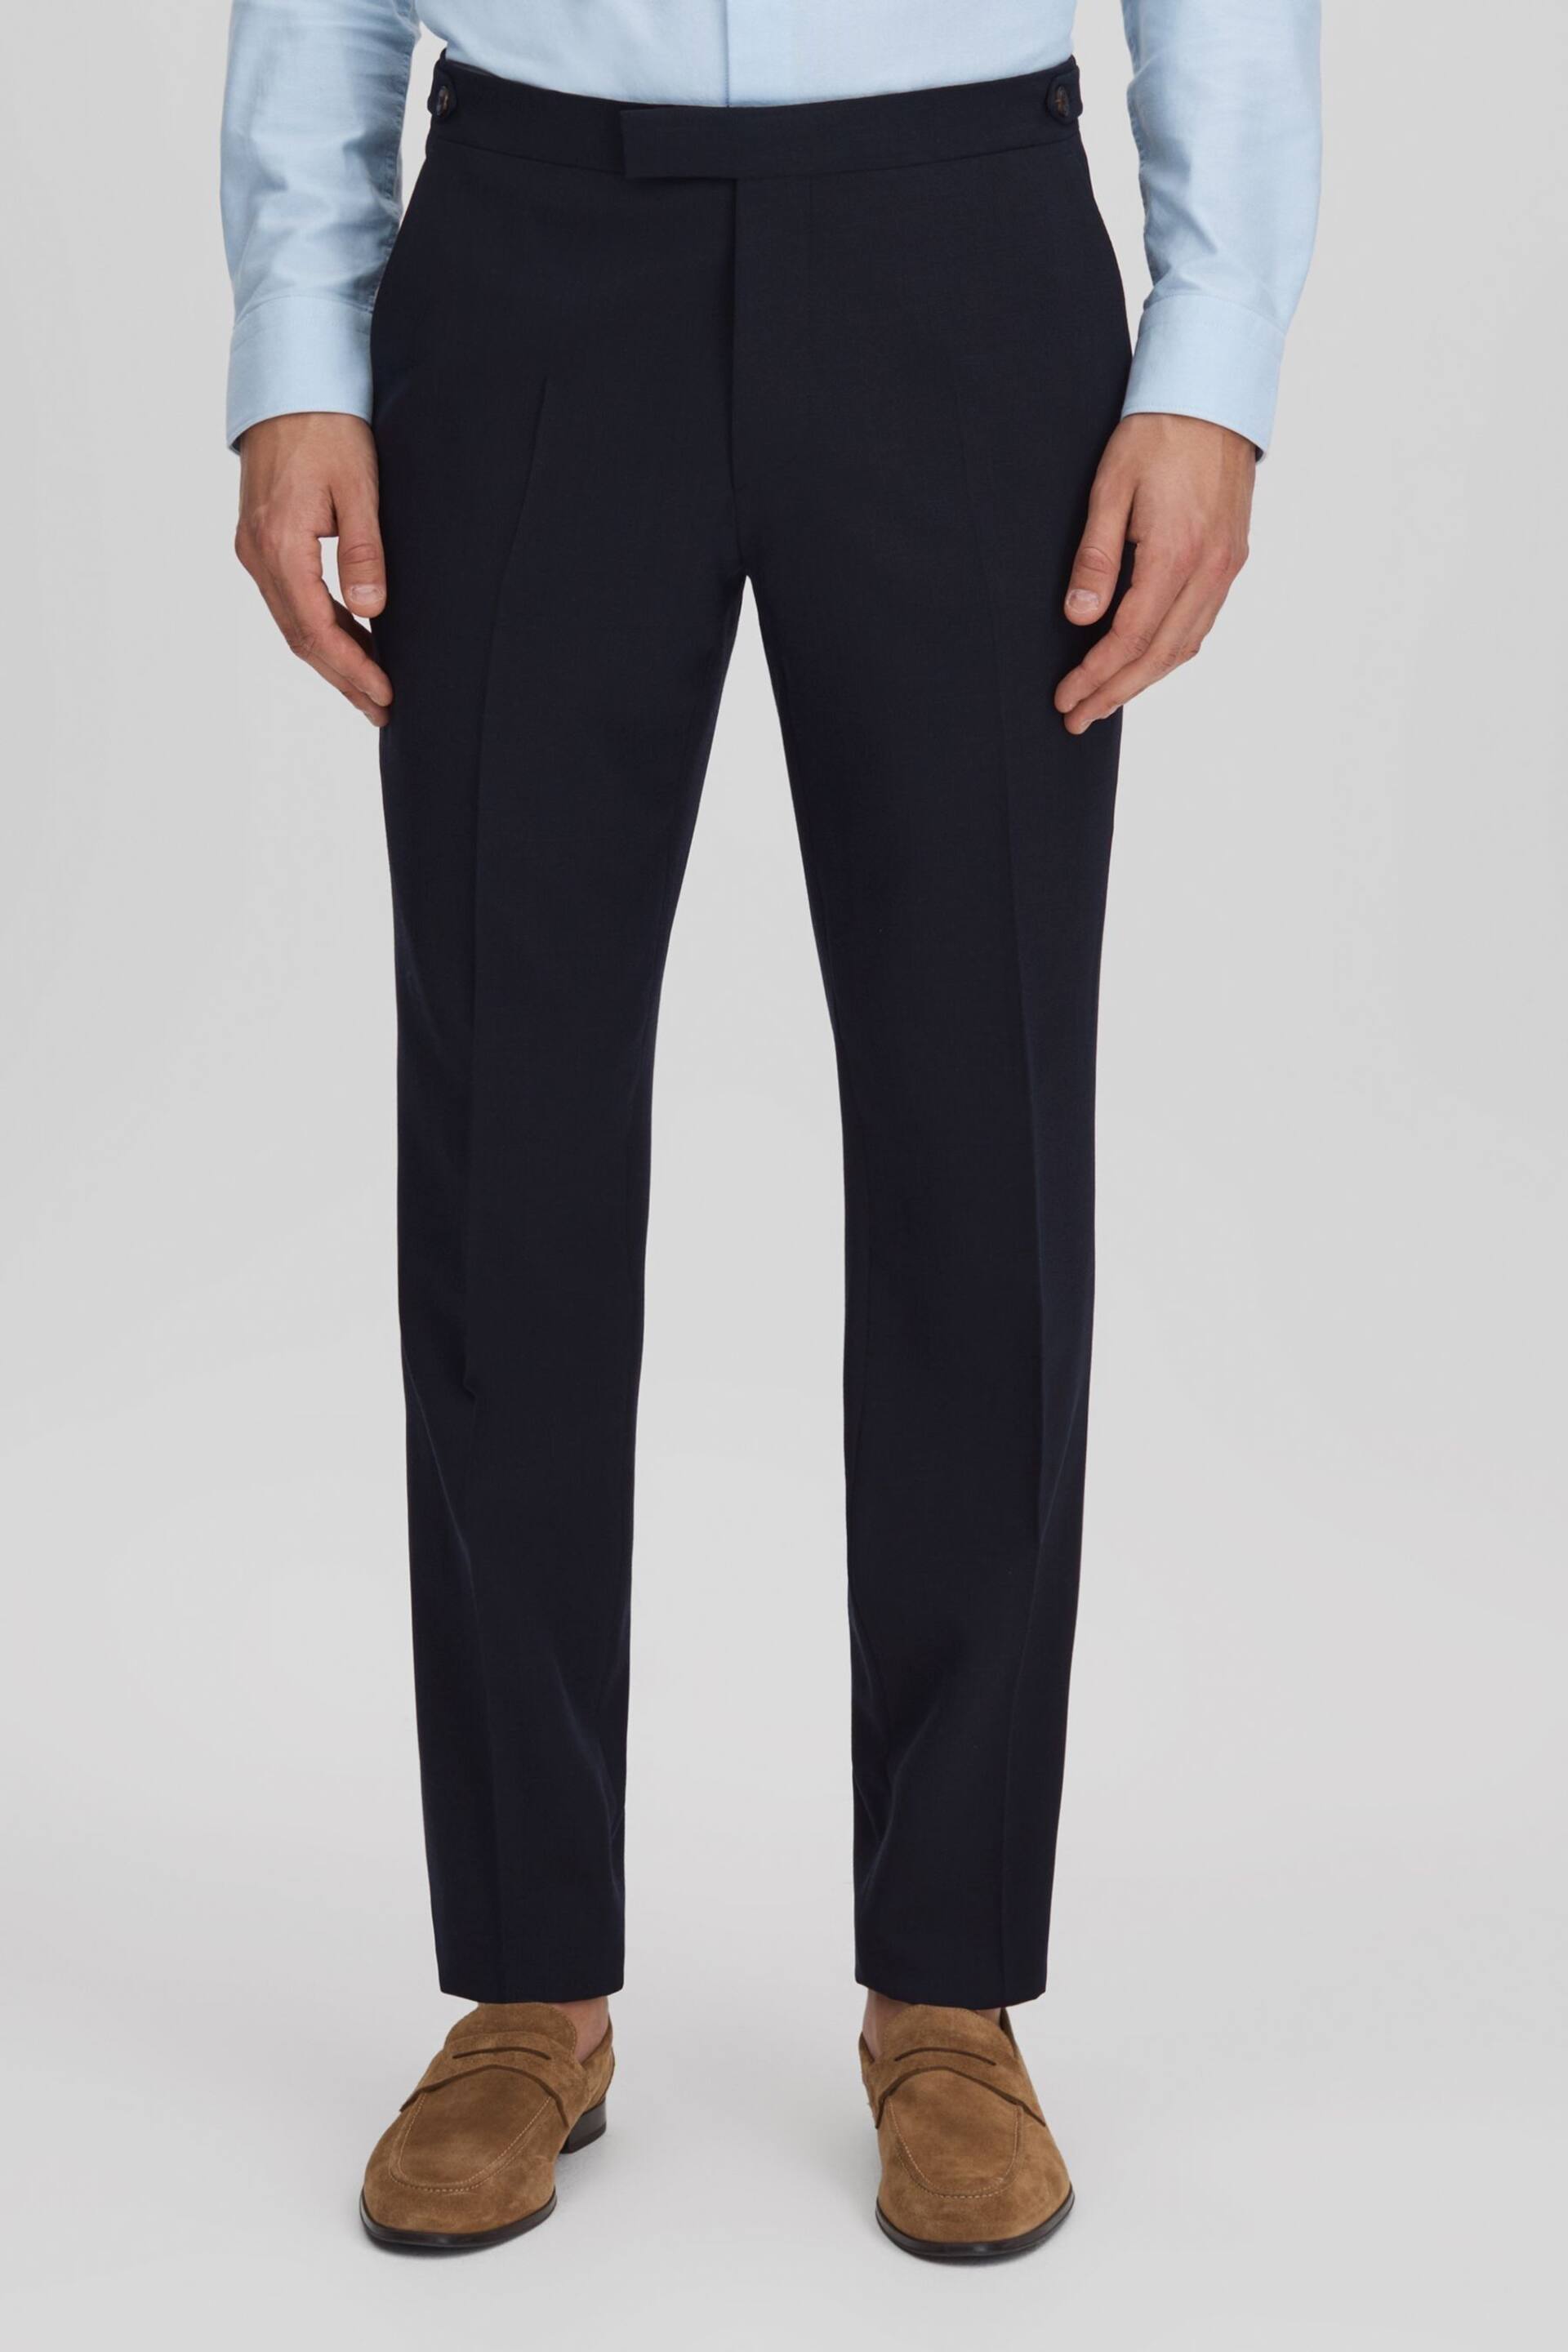 Reiss Navy Belmont Slim Fit Side Adjuster Trousers - Image 1 of 6